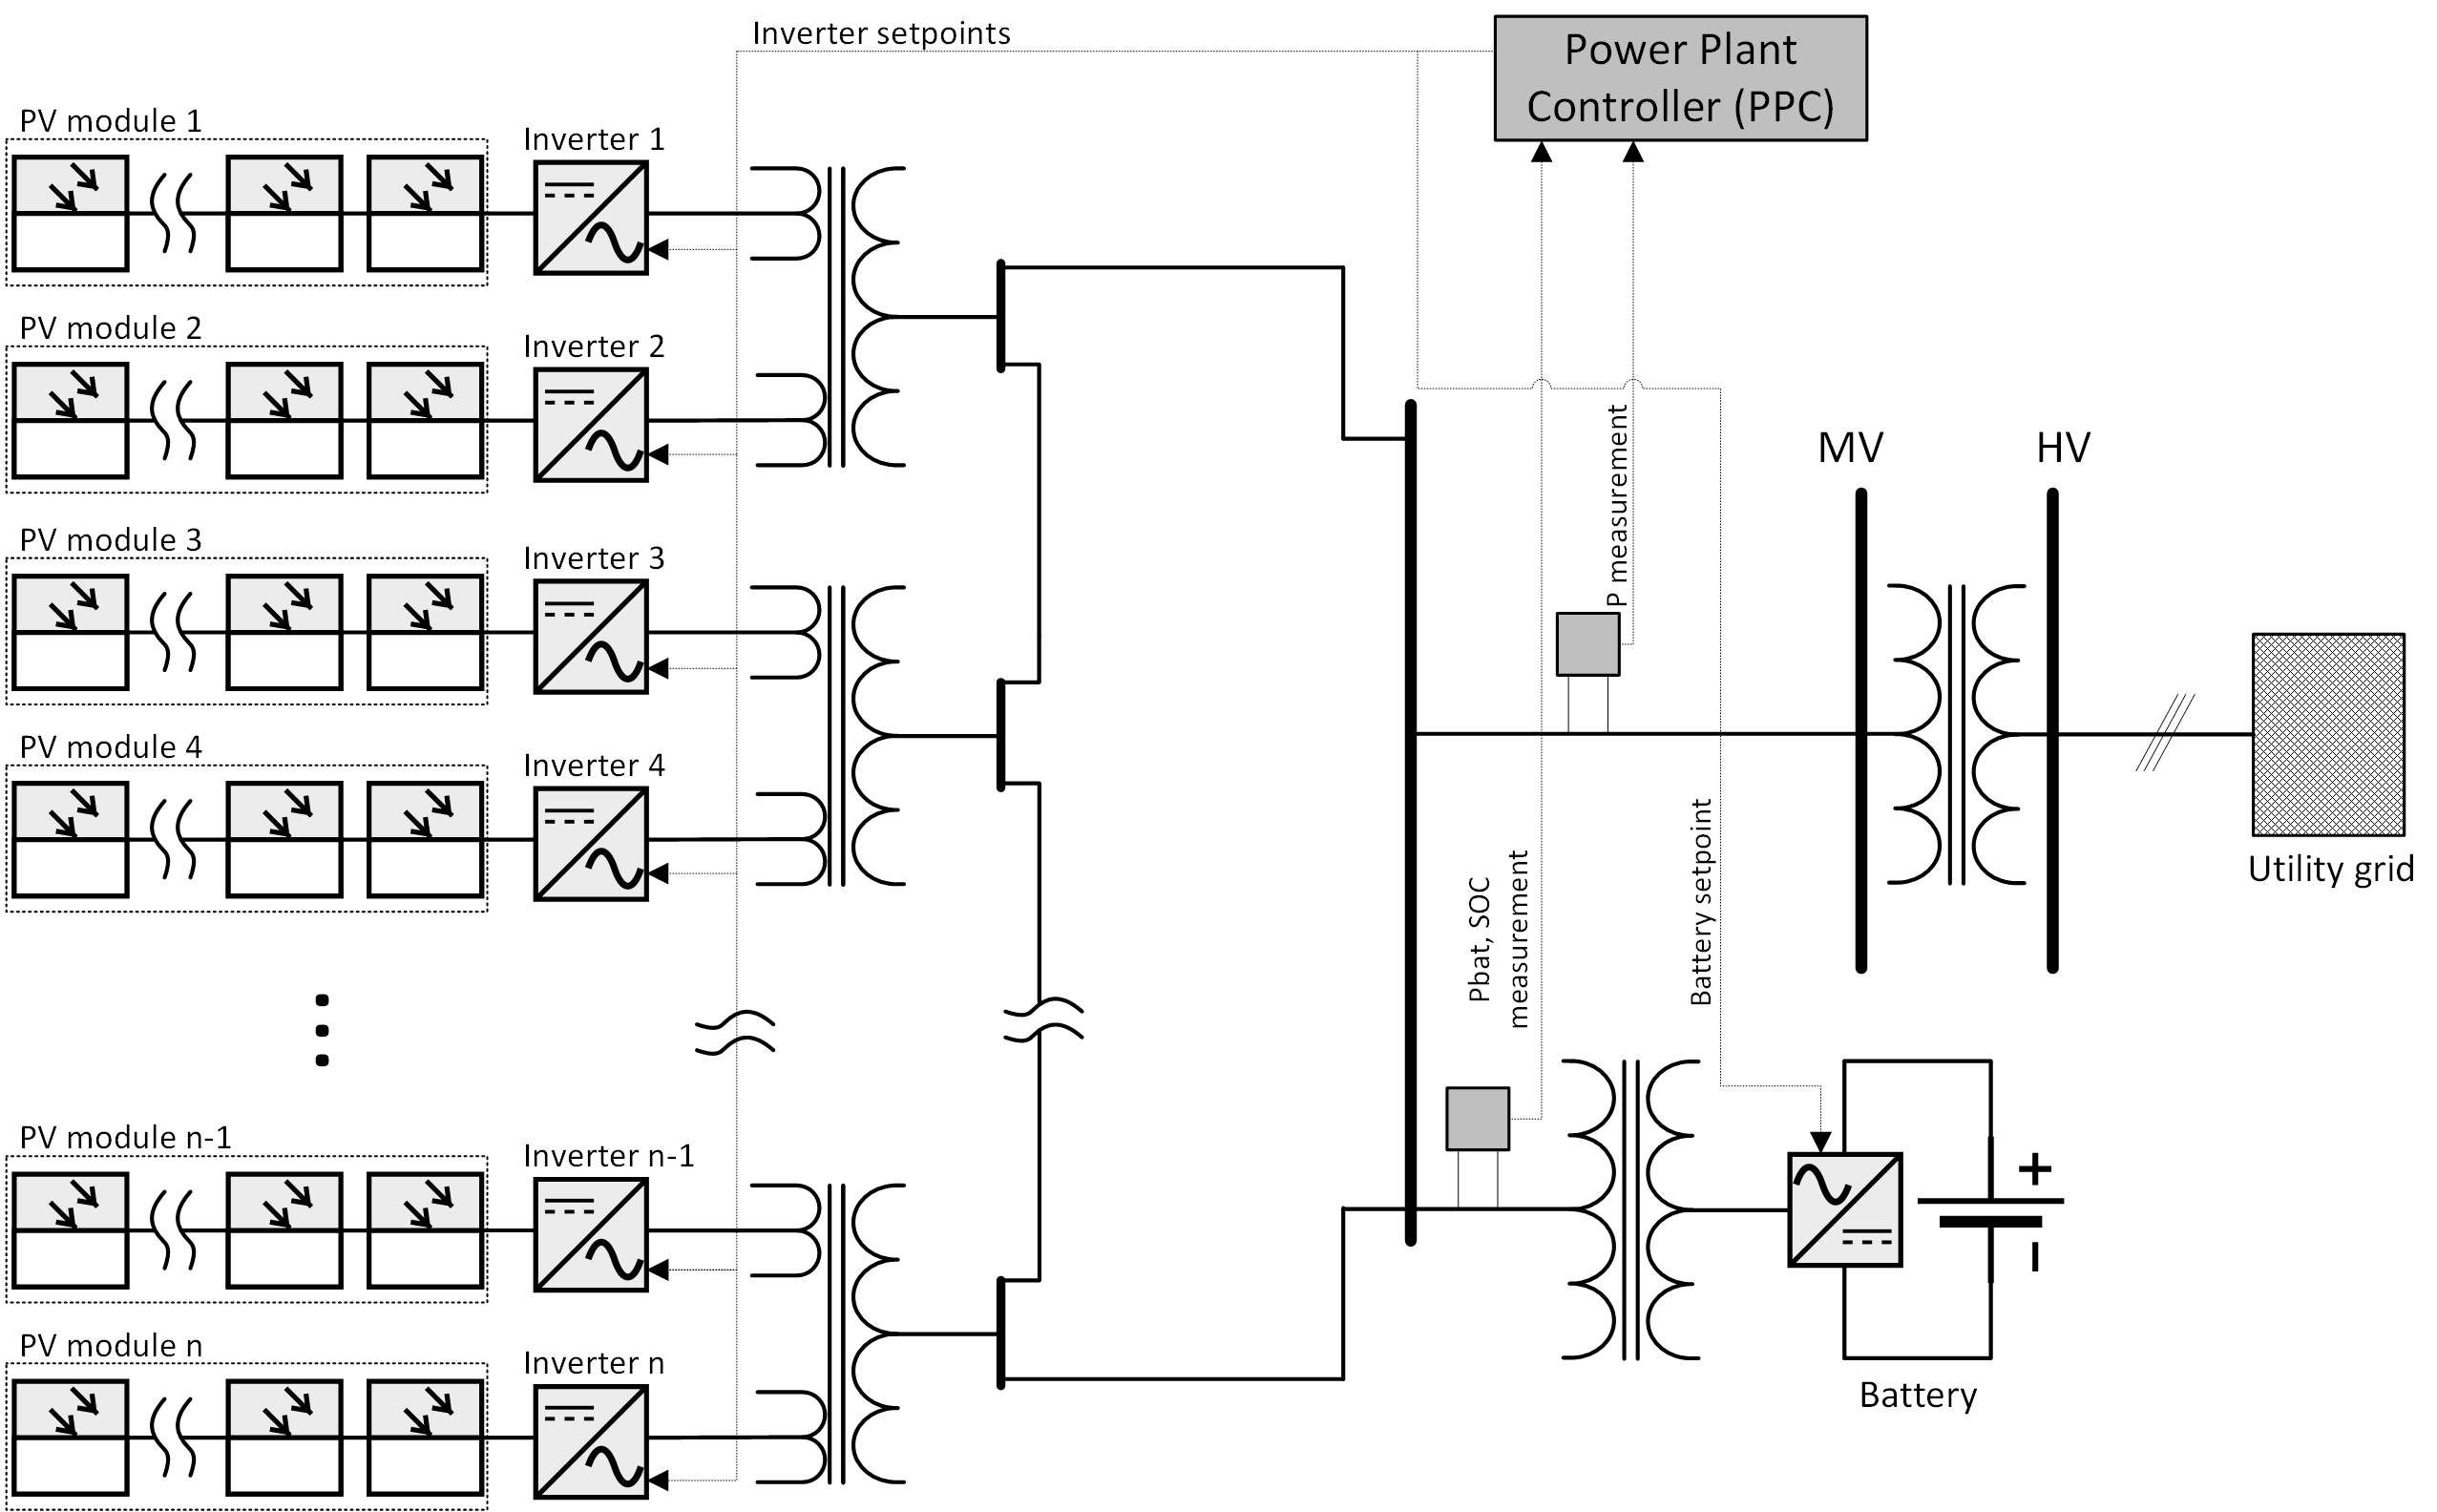 visio electrical shapes free download